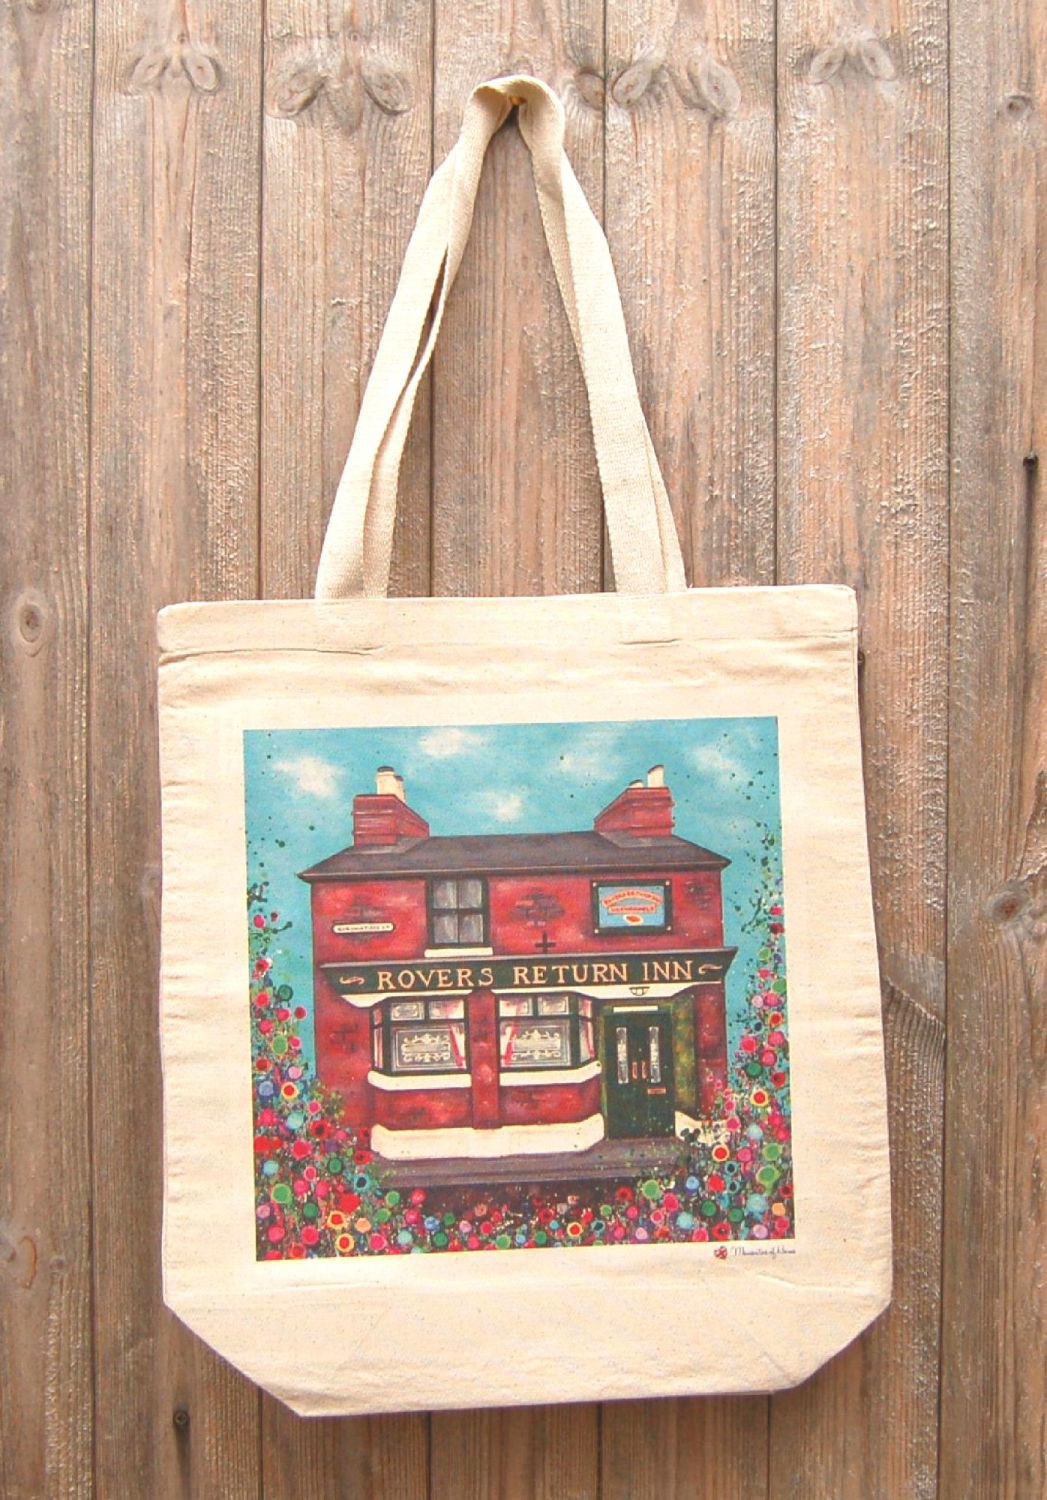 Jo Gough - Rovers Return Pub with flowers Tote Bag